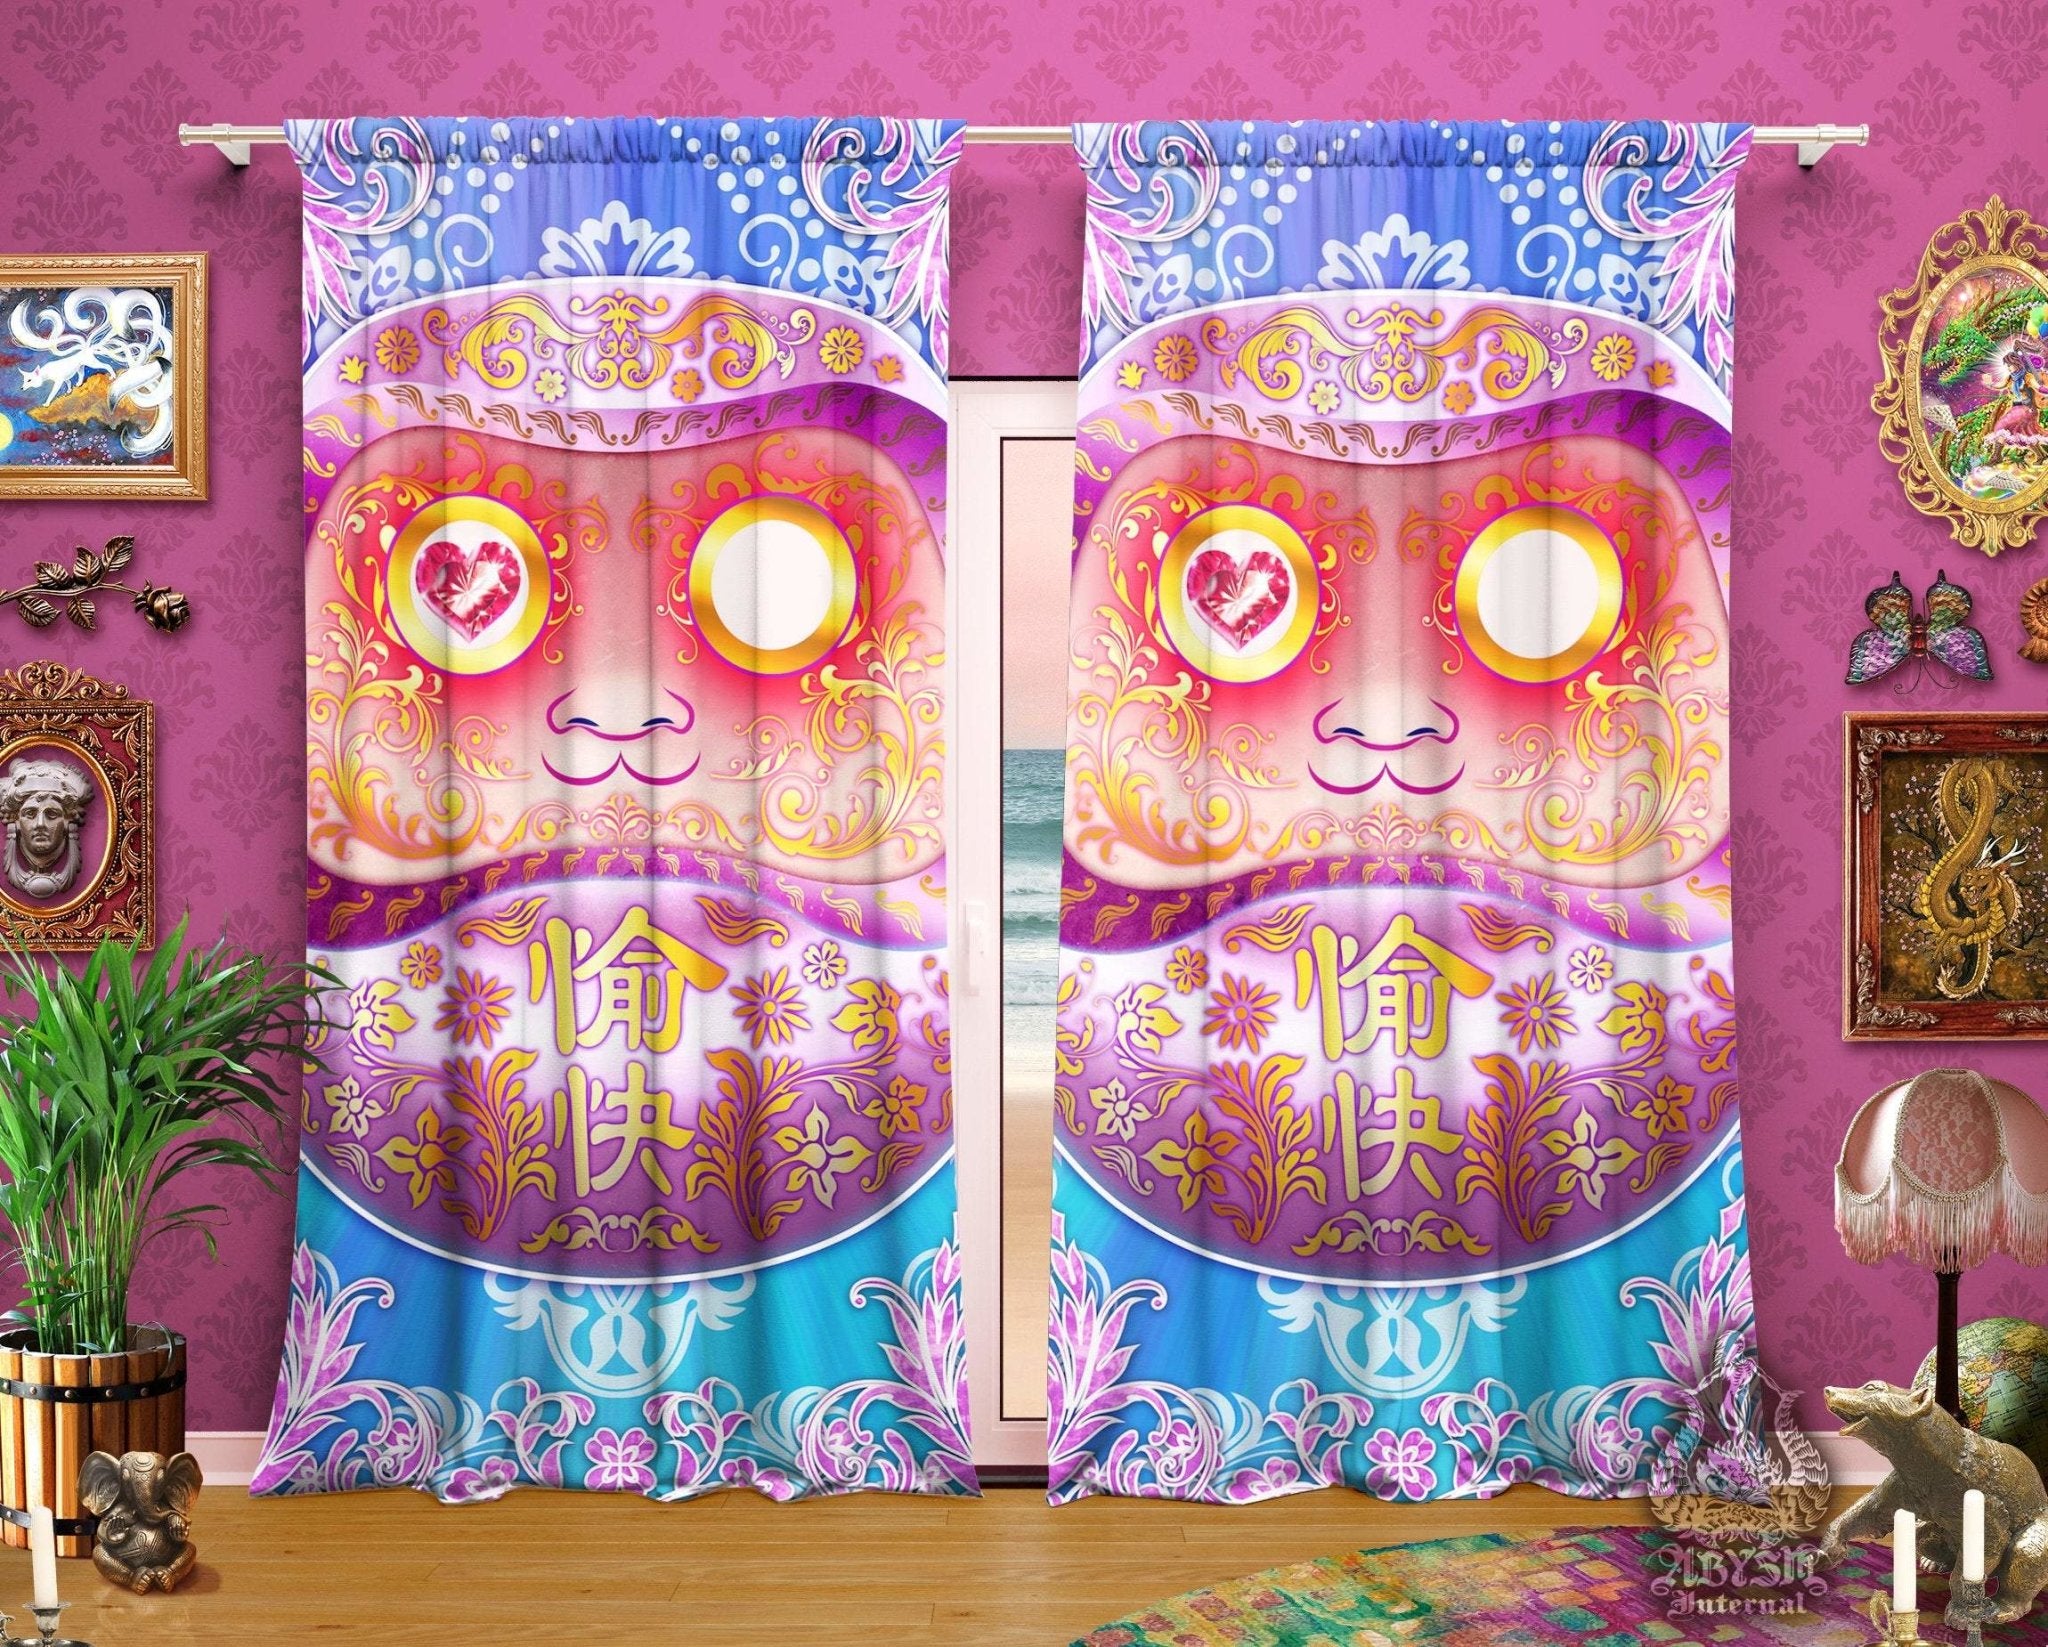 Kawaii Blackout Curtains, Long Window Panels, Funny Pastel Daruma, Anime Decor, Art Print, Funky and Eclectic Home Decor - Holographic and Aesthetic Room Decor - Abysm Internal